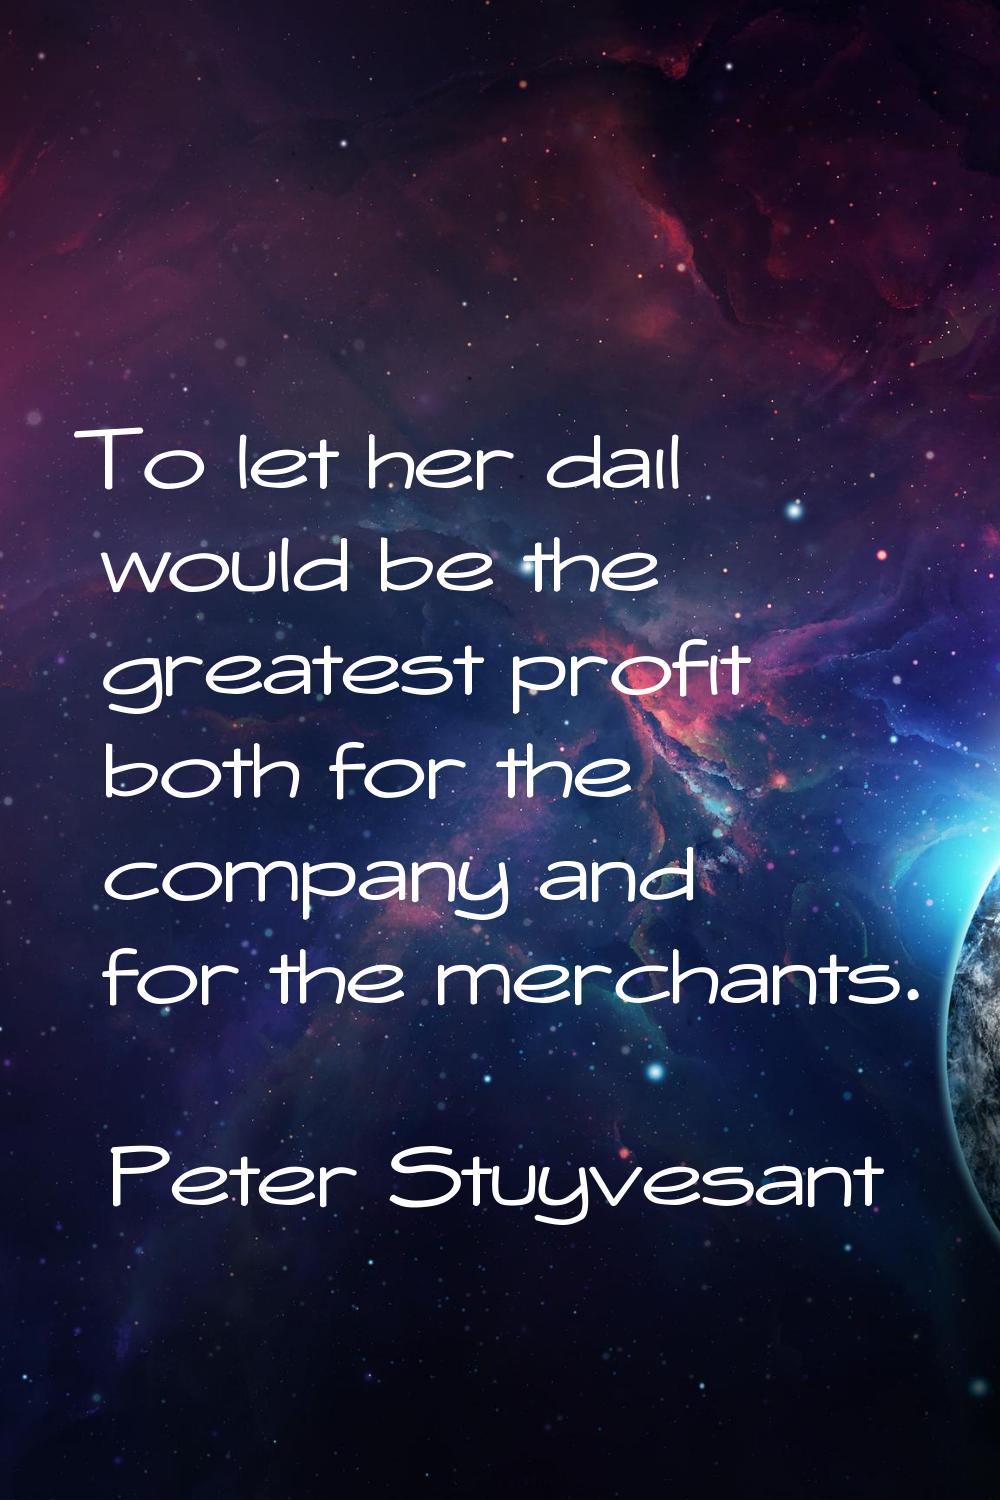 To let her dail would be the greatest profit both for the company and for the merchants.